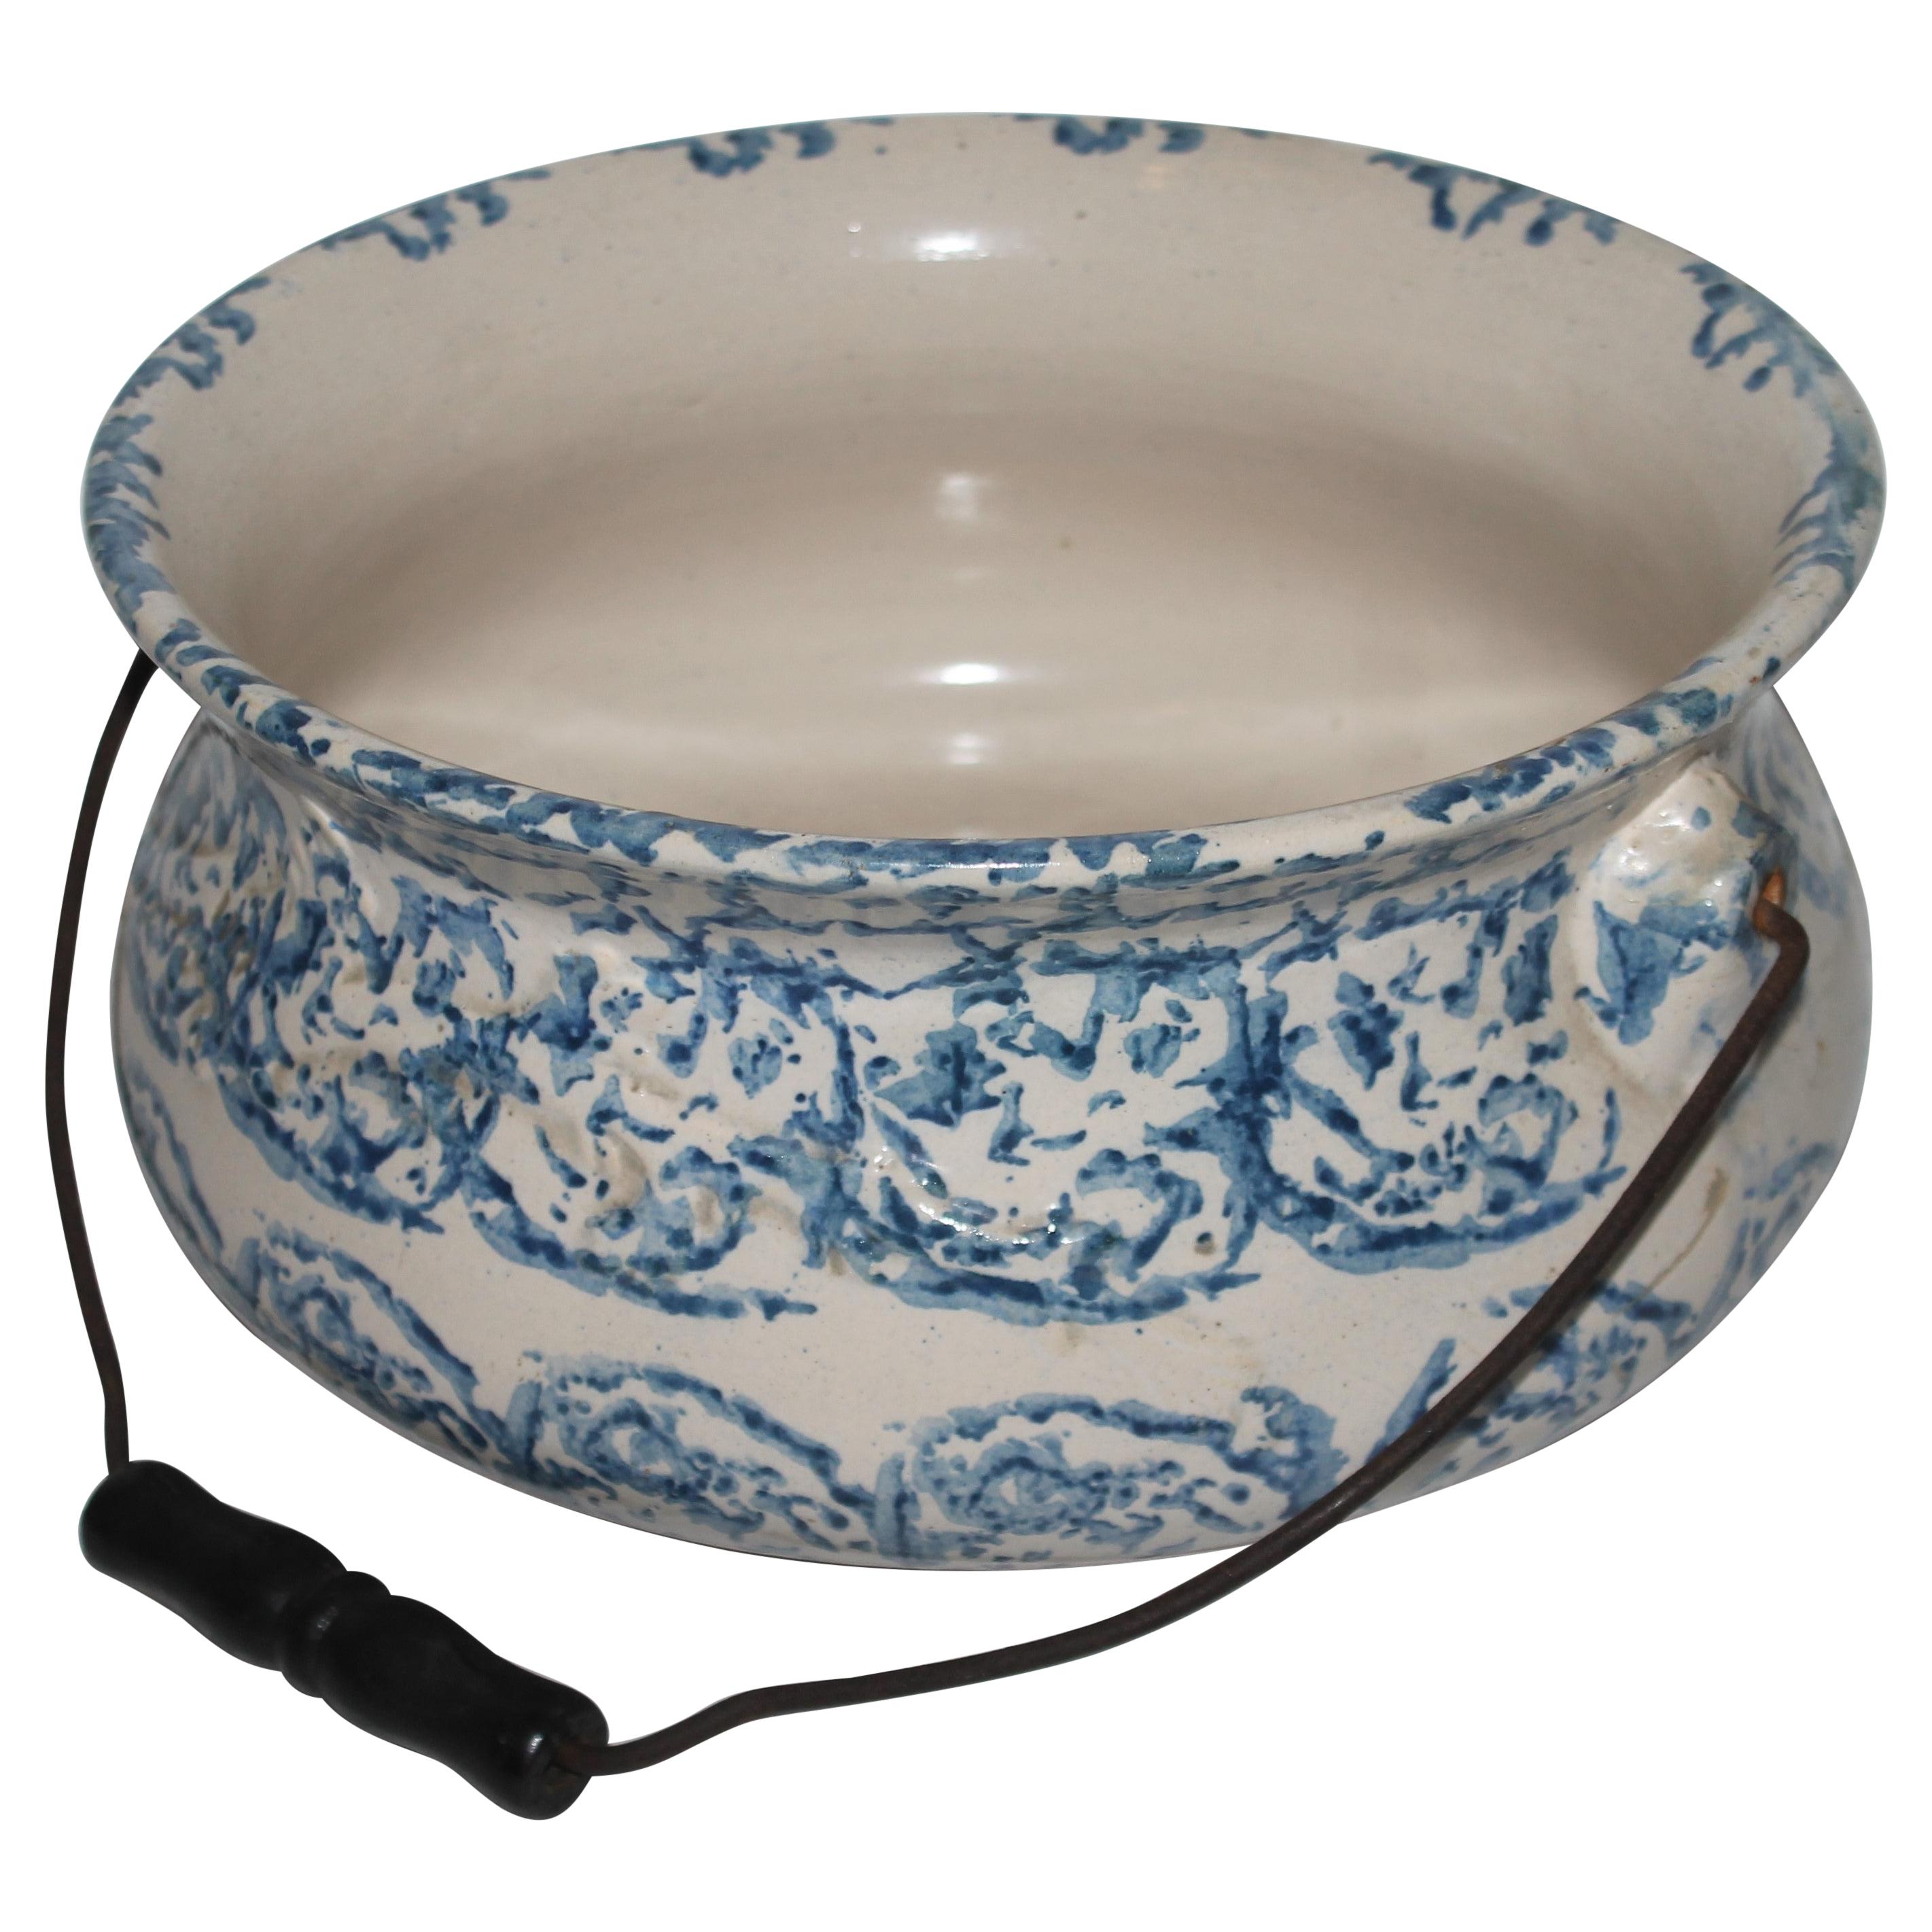 19th C Sponge Ware Giant Mixing Bowl For Sale at 1stDibs